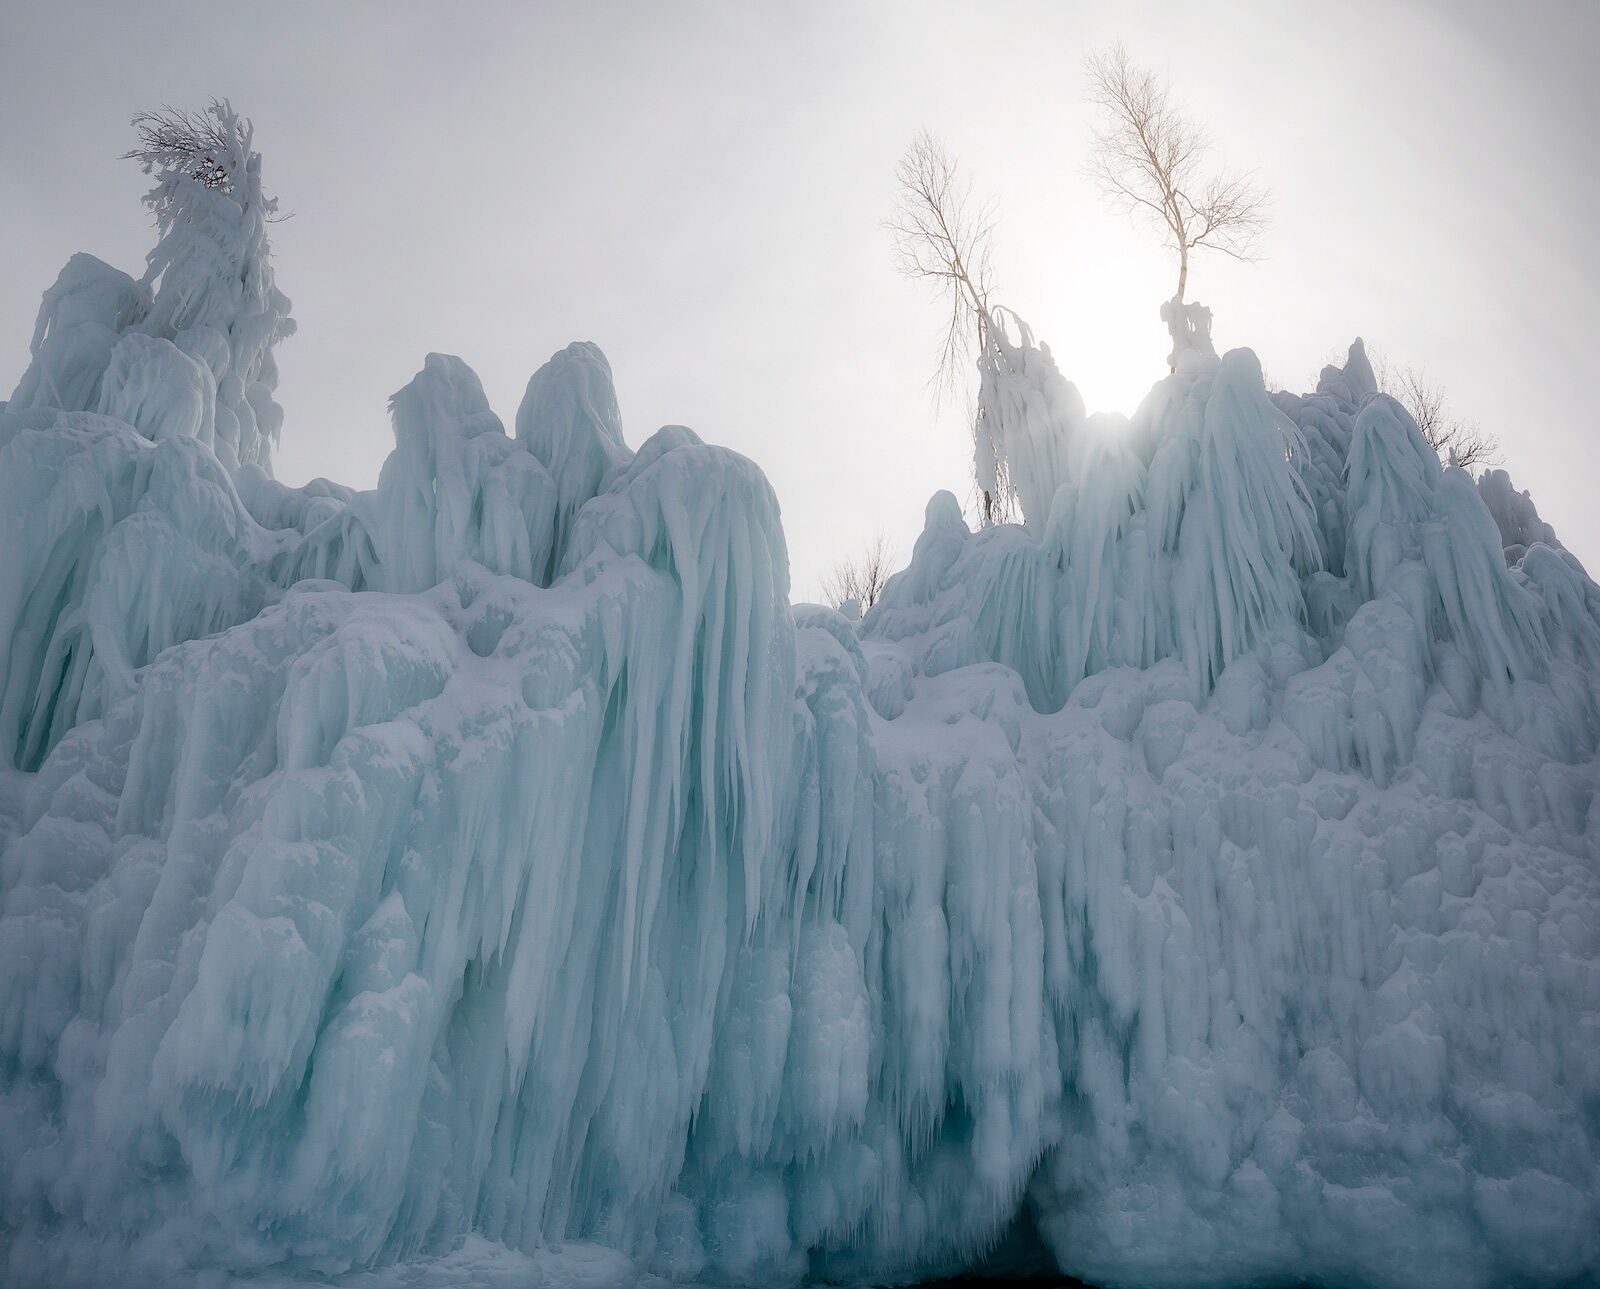 ice formations in the apostle islands national lakeshore